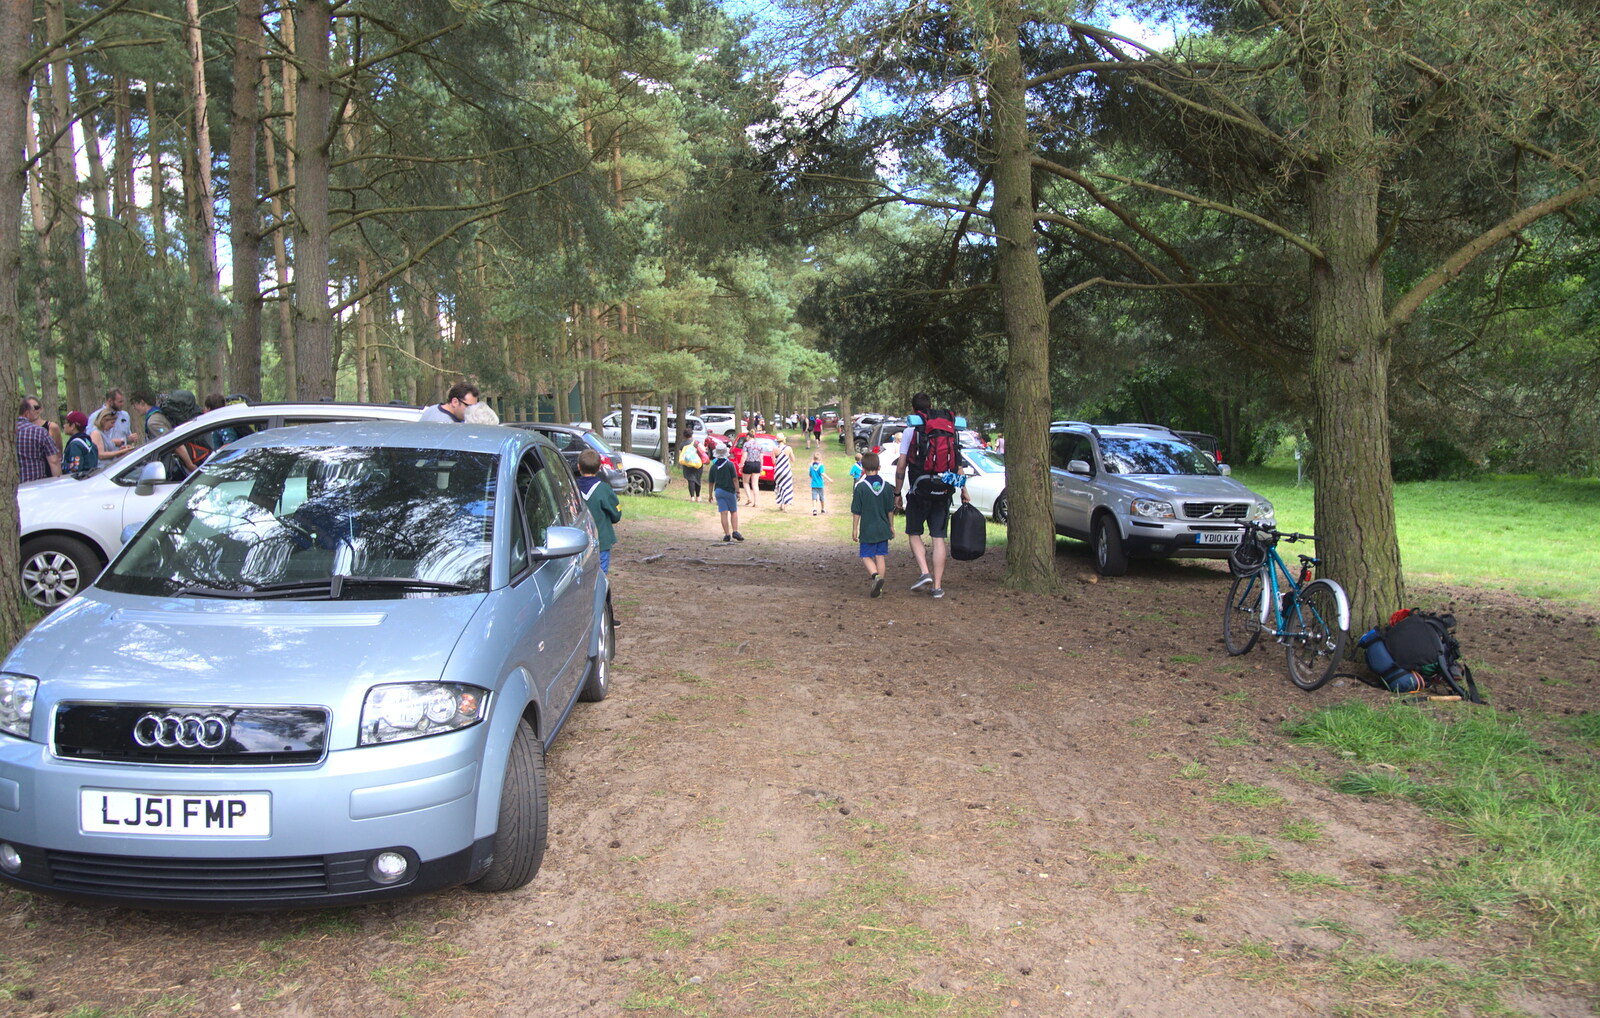 Campers head off from Fred's Camping, Curry and the Closing of B&Q, Thetford, Diss  and Ipswich - 16th July 2016